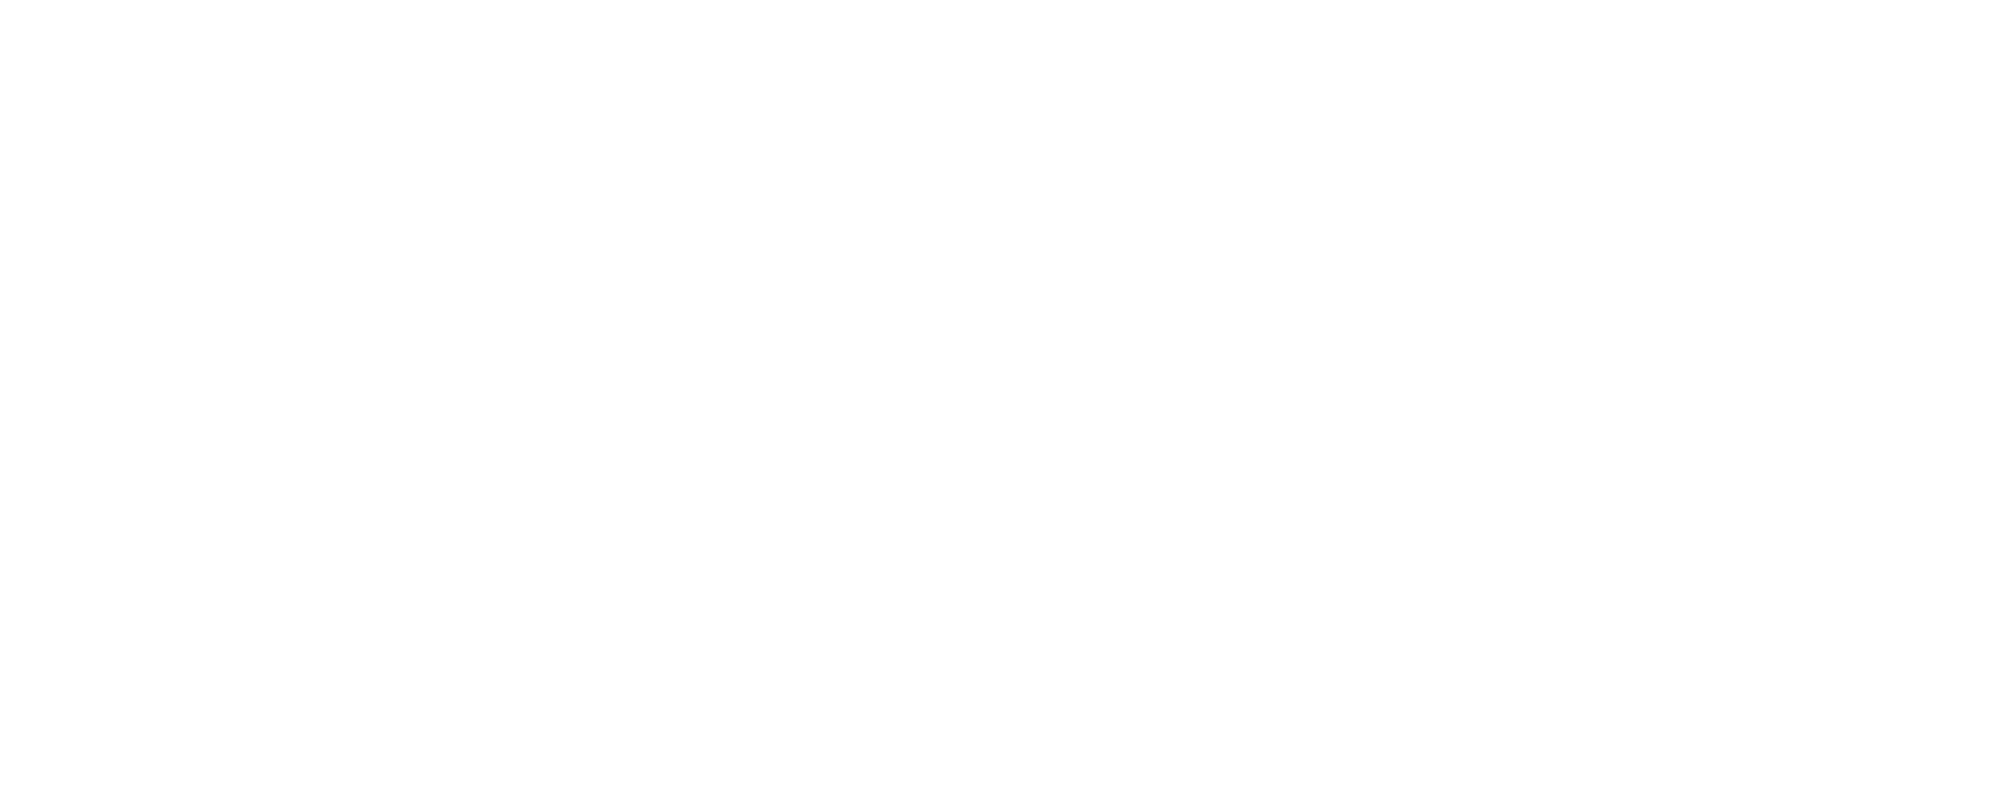 OVATION TV SIGNS MULTI-YEAR CARRIAGE RENEWAL AGREEMENT WITH THE NATIONAL CABLE TELEVISION COOPERATIVE